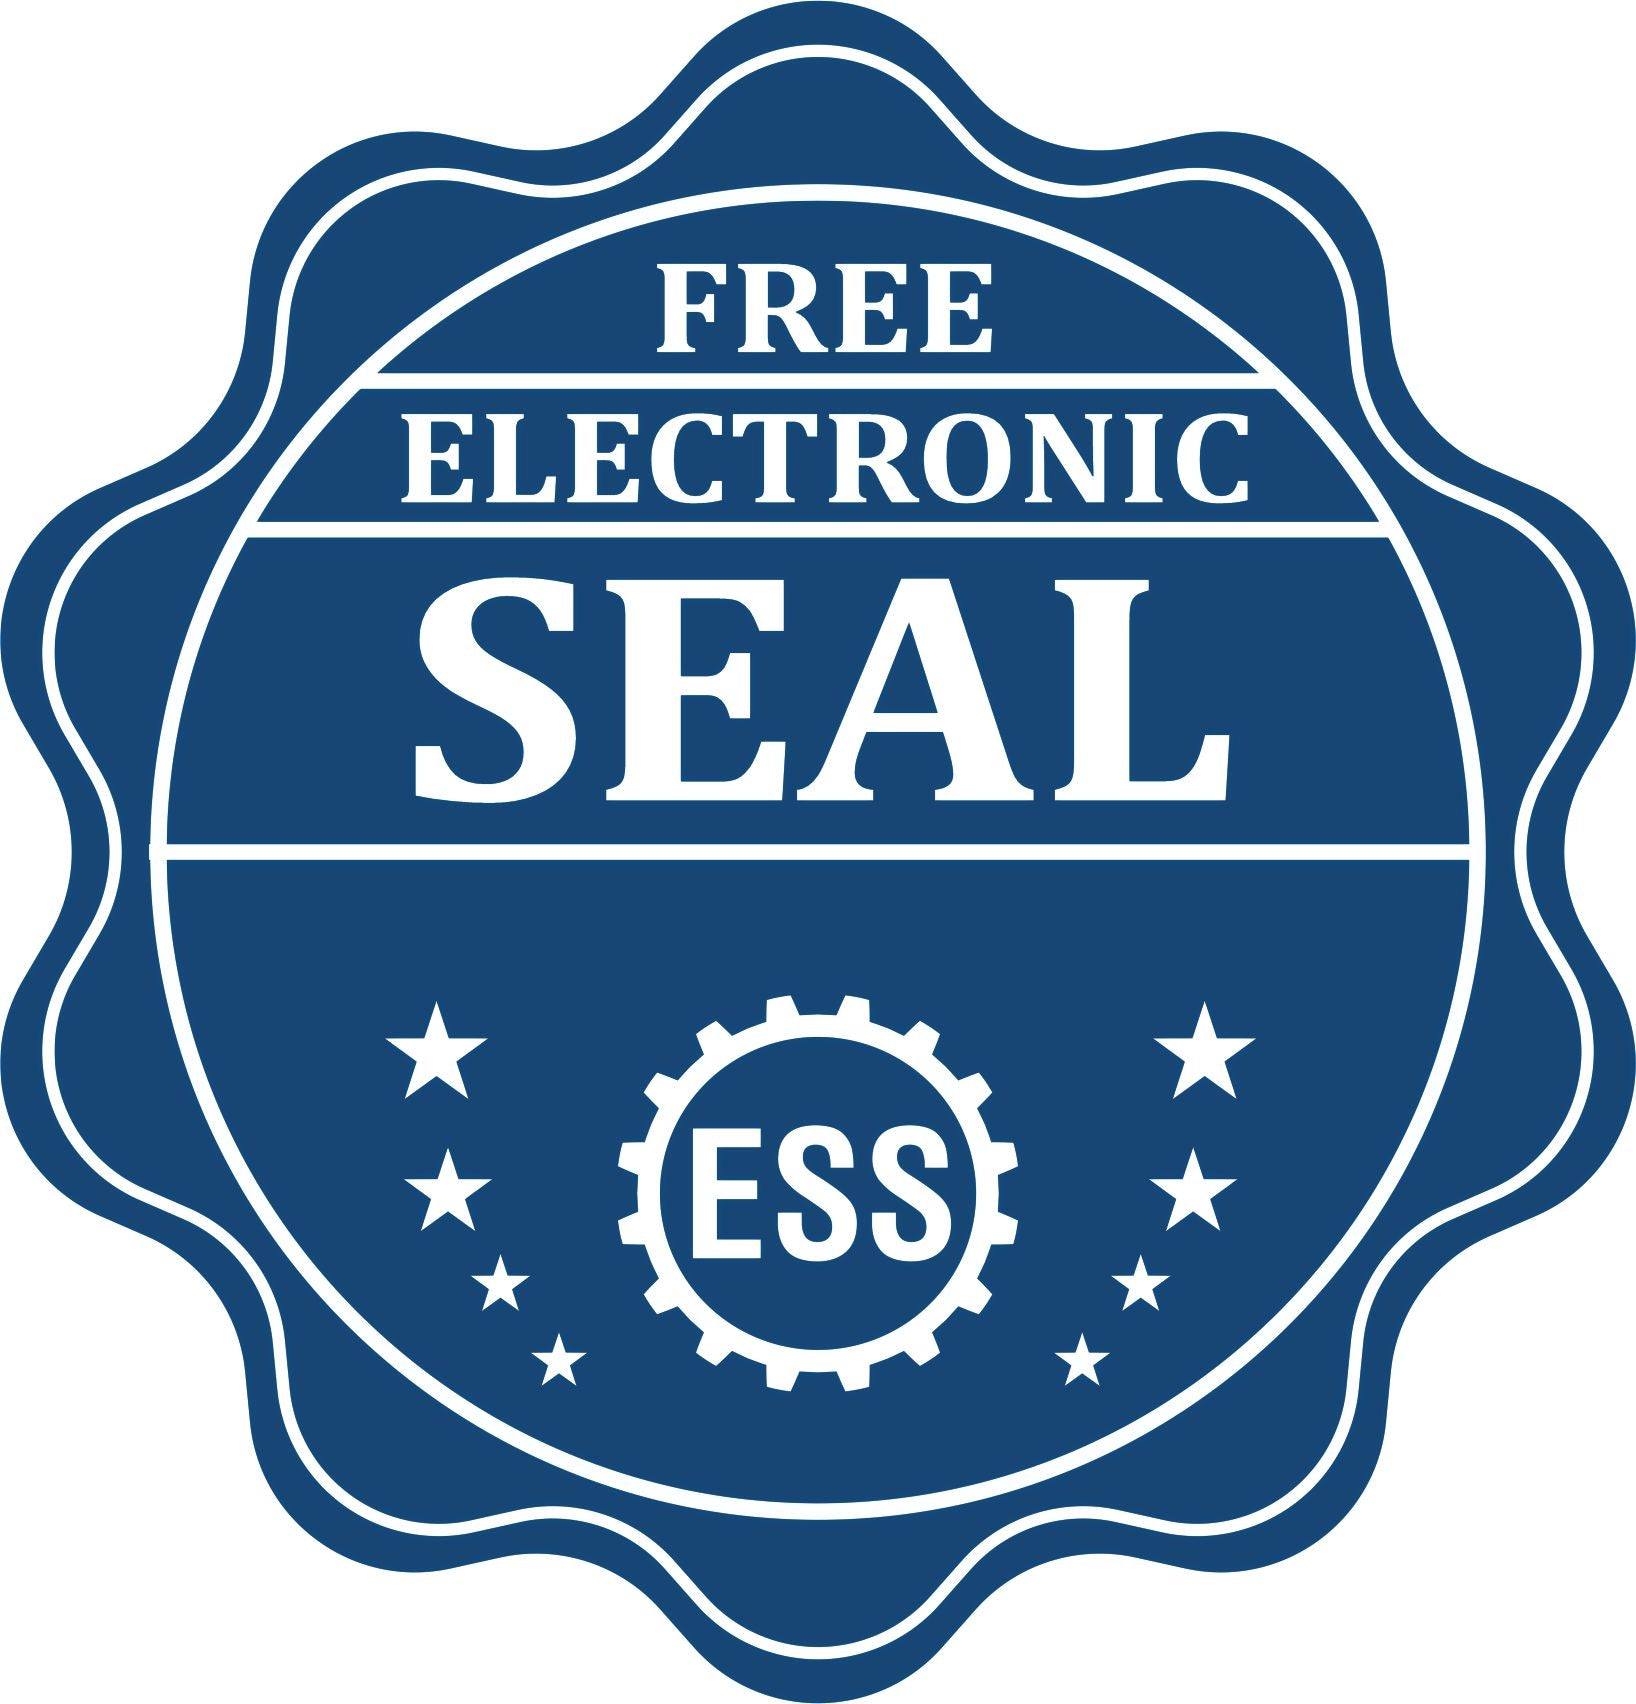 A badge showing a free electronic seal for the Self-Inking Arizona Landscape Architect Stamp with stars and the ESS gear on the emblem.